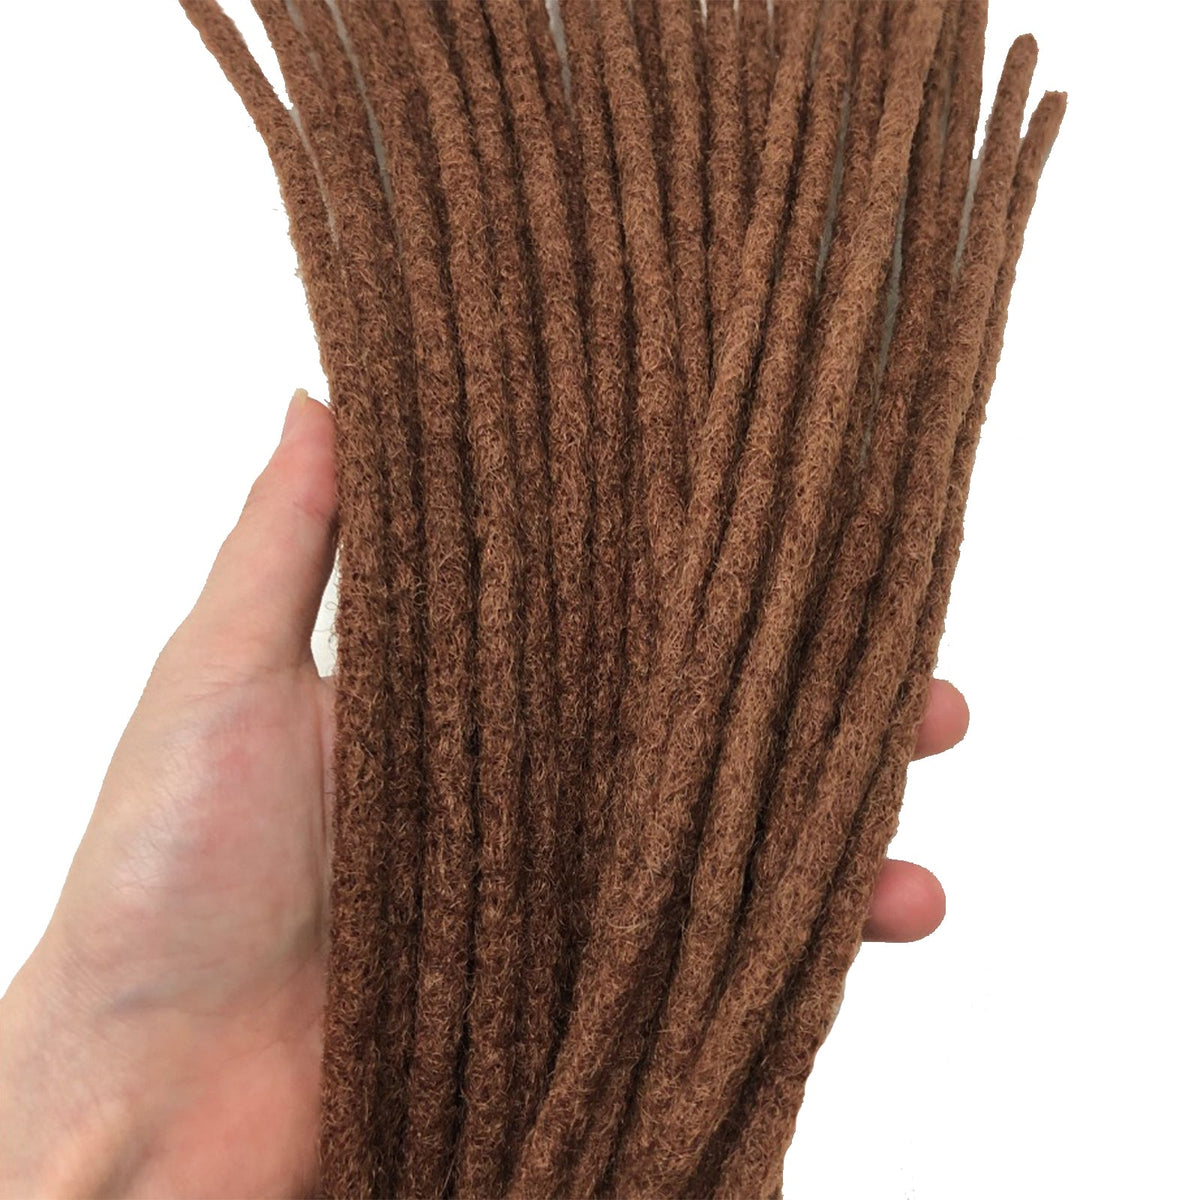 100% Human Hair Dreadlock Extensions 8 Inch 10 Strands Handmade Natural Loc Extensions Human Hair Bundle Dreads Extensions For Woman & Men Can Be Dyed/Bleached (Brown / 33, 8 inch length 0.4 cm Width